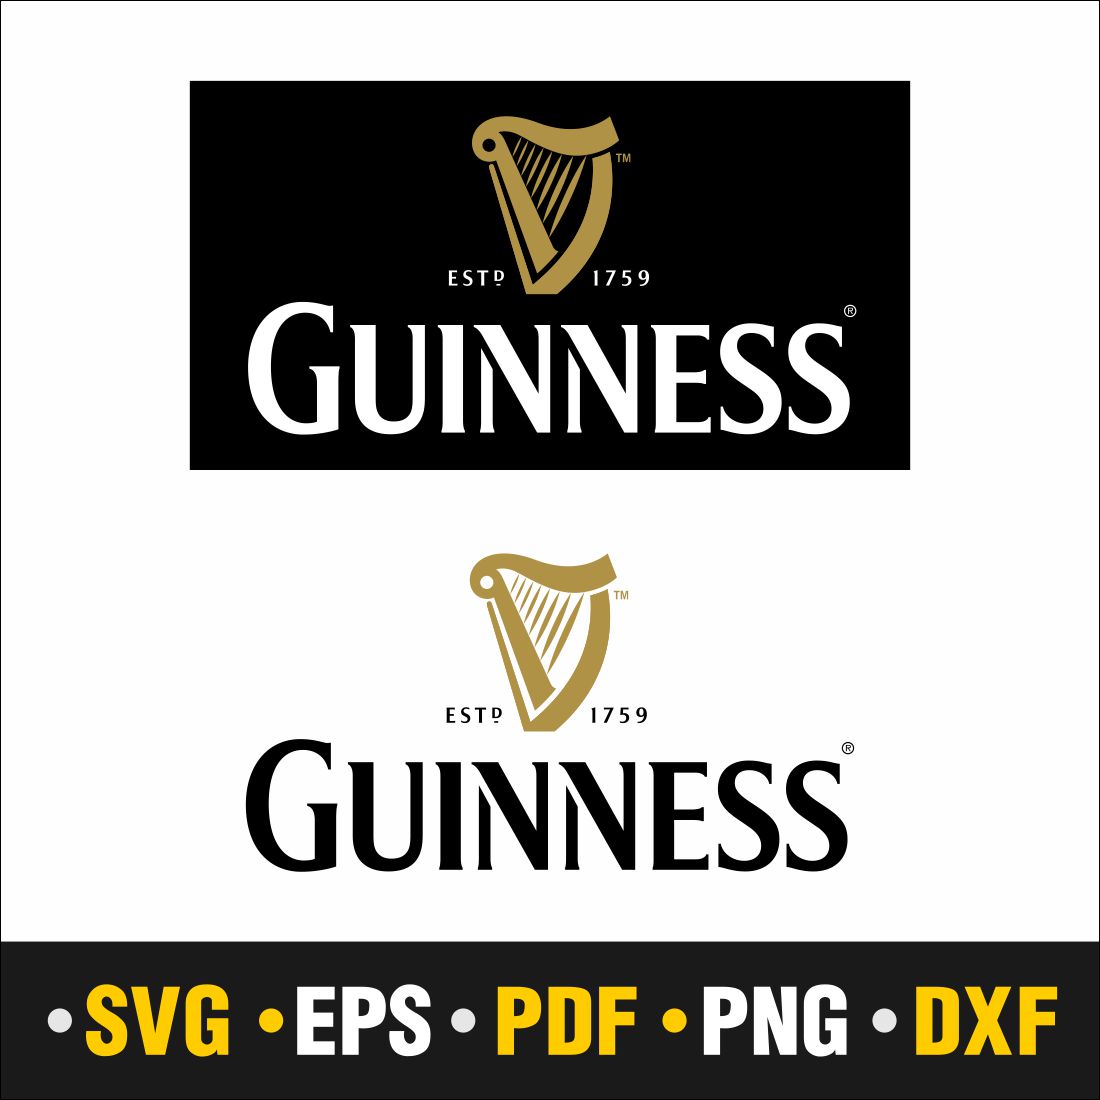 Guiness Svg, Guiness, Guiness Beer Svg, Guiness Png, Beer Png, Guines Svg, Instant Download Vector Cut file Cricut, Silhouette, Pdf Png, Dxf, Decal cover image.